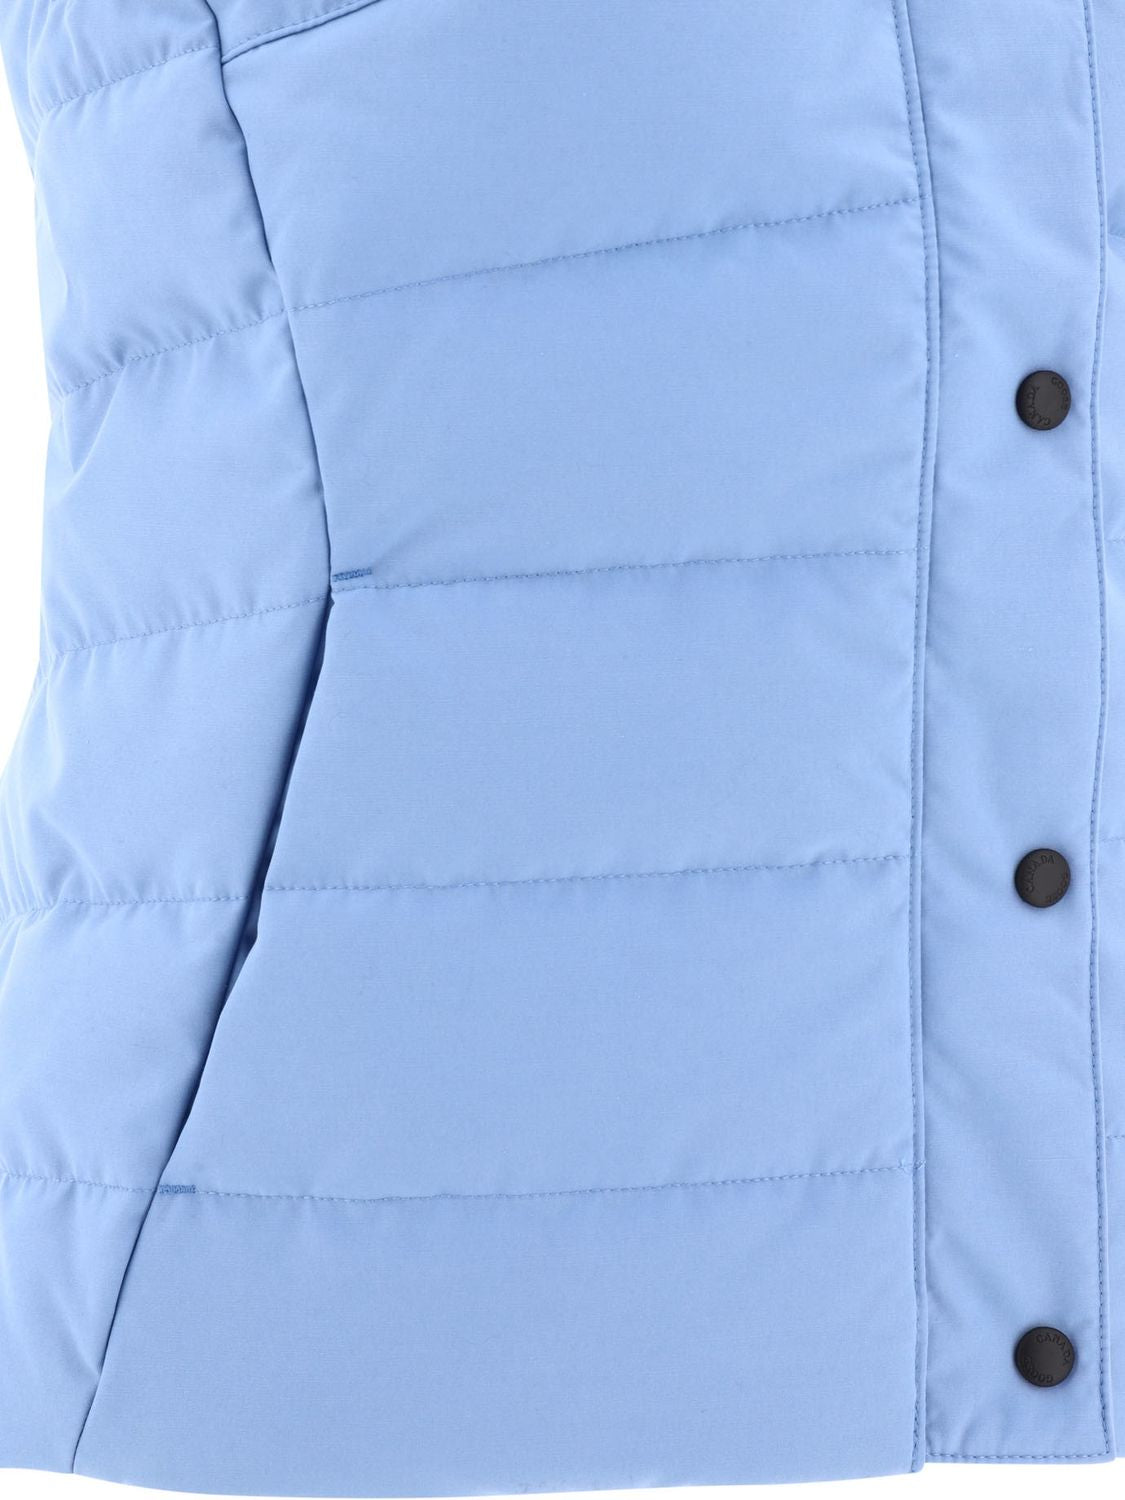 CANADA GOOSE Light Blue Regular Fit Vest Jacket with Inner Lining and Feather Padding for Women